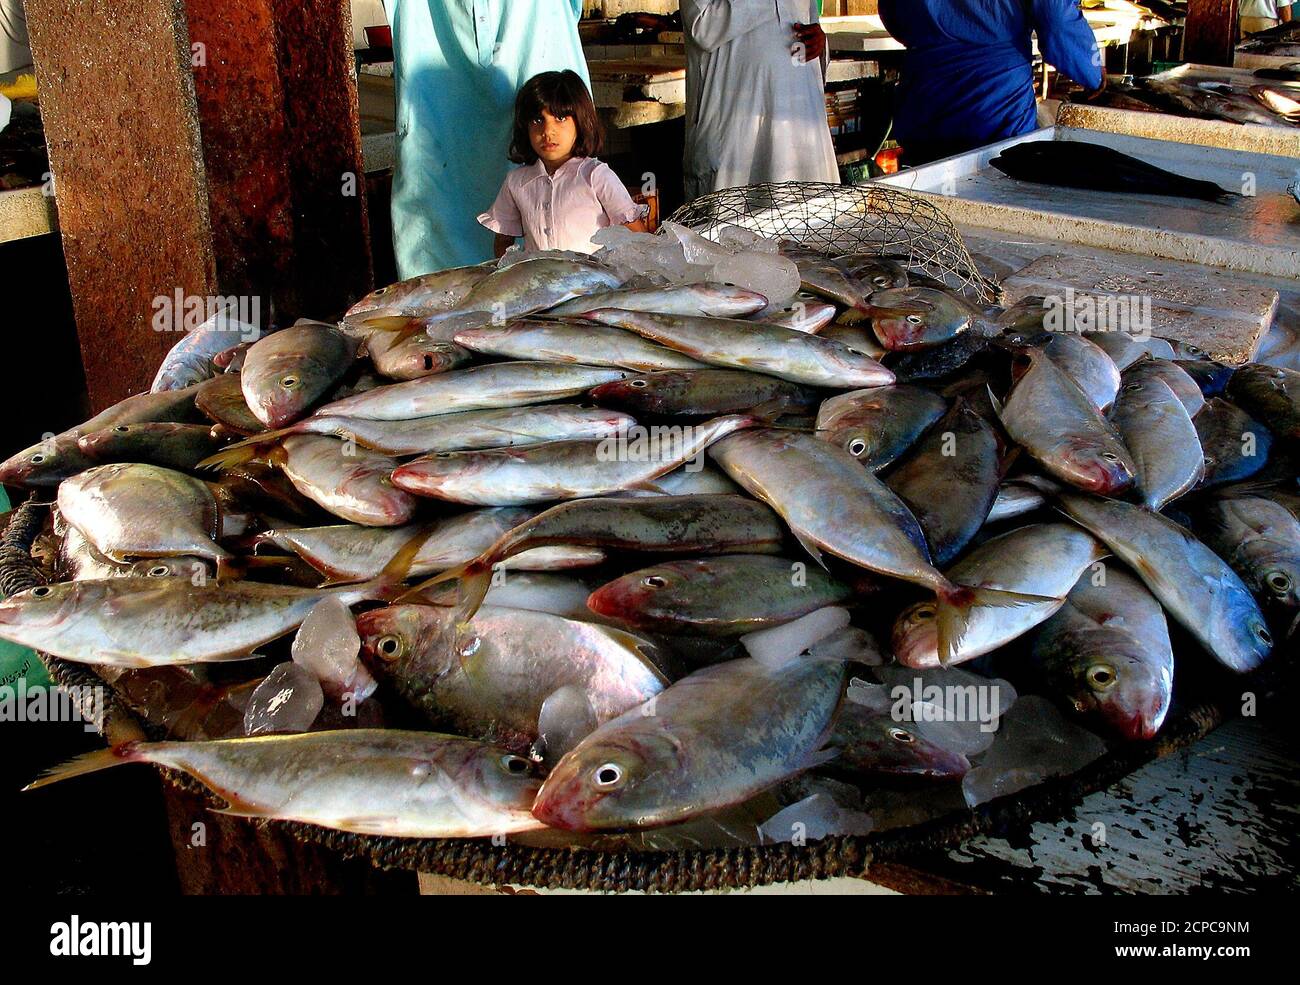 An Arabian girl looks at the fish as she is shpoping with her father at the Arabian Gulf of Sharjah market, part of the United Arab Emirates (UAE) November 6, 2003. The U.A.E is the fifth biggest fish producer in the Arab World. As fish resources constitute a significant percentage of the country's annual income, the U.A.E has a special ministry known as the Ministry of Agriculture and Fishery. The U.A.E's output of fish has reached 114,000 tonnes in the year 2002. The warm and shallow waters of the Arabian Gulf provide plenty of plankton for the fish. Besides, the calm sea conditions and the  Stock Photo